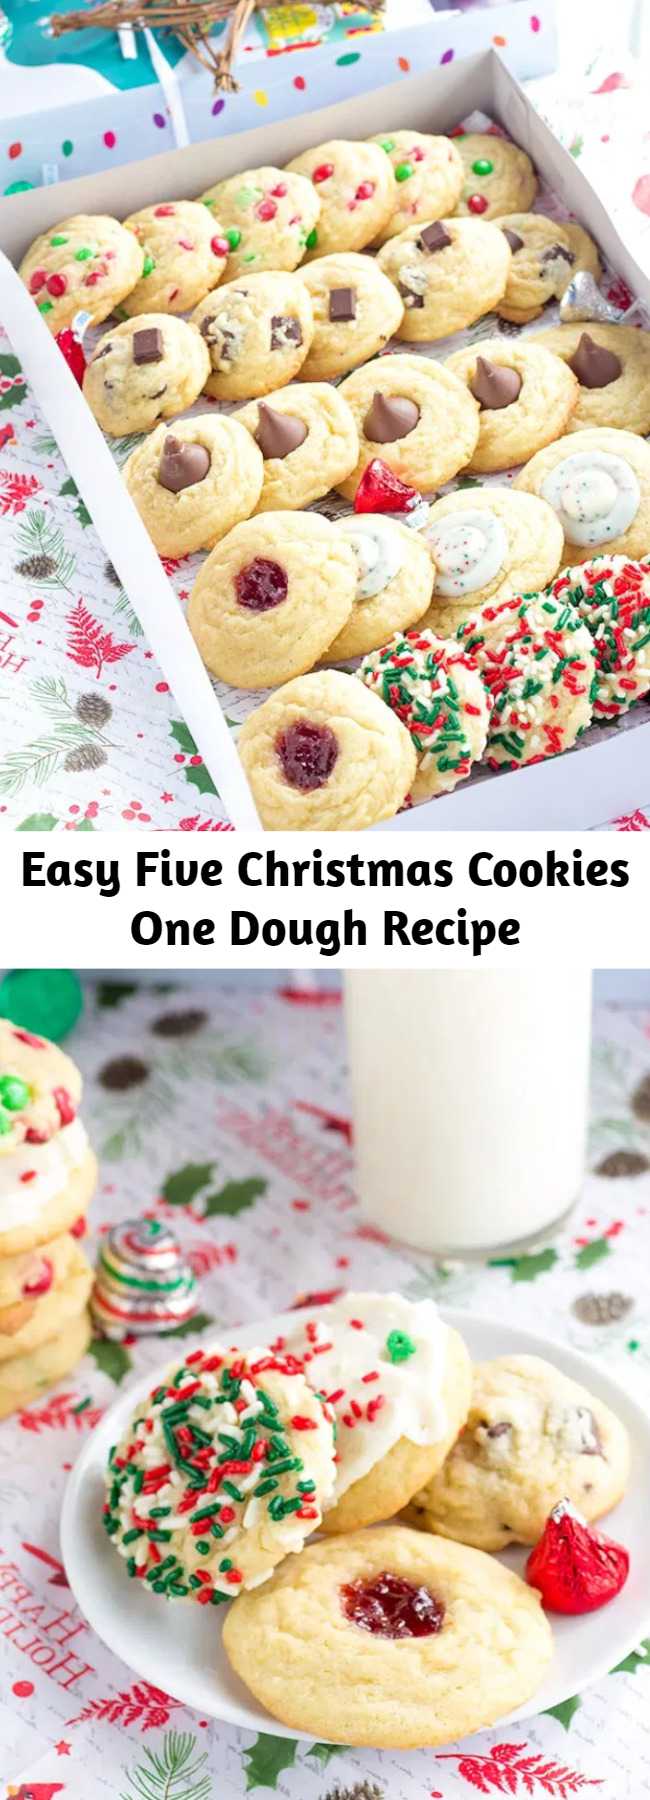 Easy Five Christmas Cookies One Dough Recipe - Use one dough to make an entire Christmas cookie box for gifts. Add chocolate chips, m&m's, kisses, jam, or roll them in sprinkles! #christmascookies #christmas #christmasrecipes